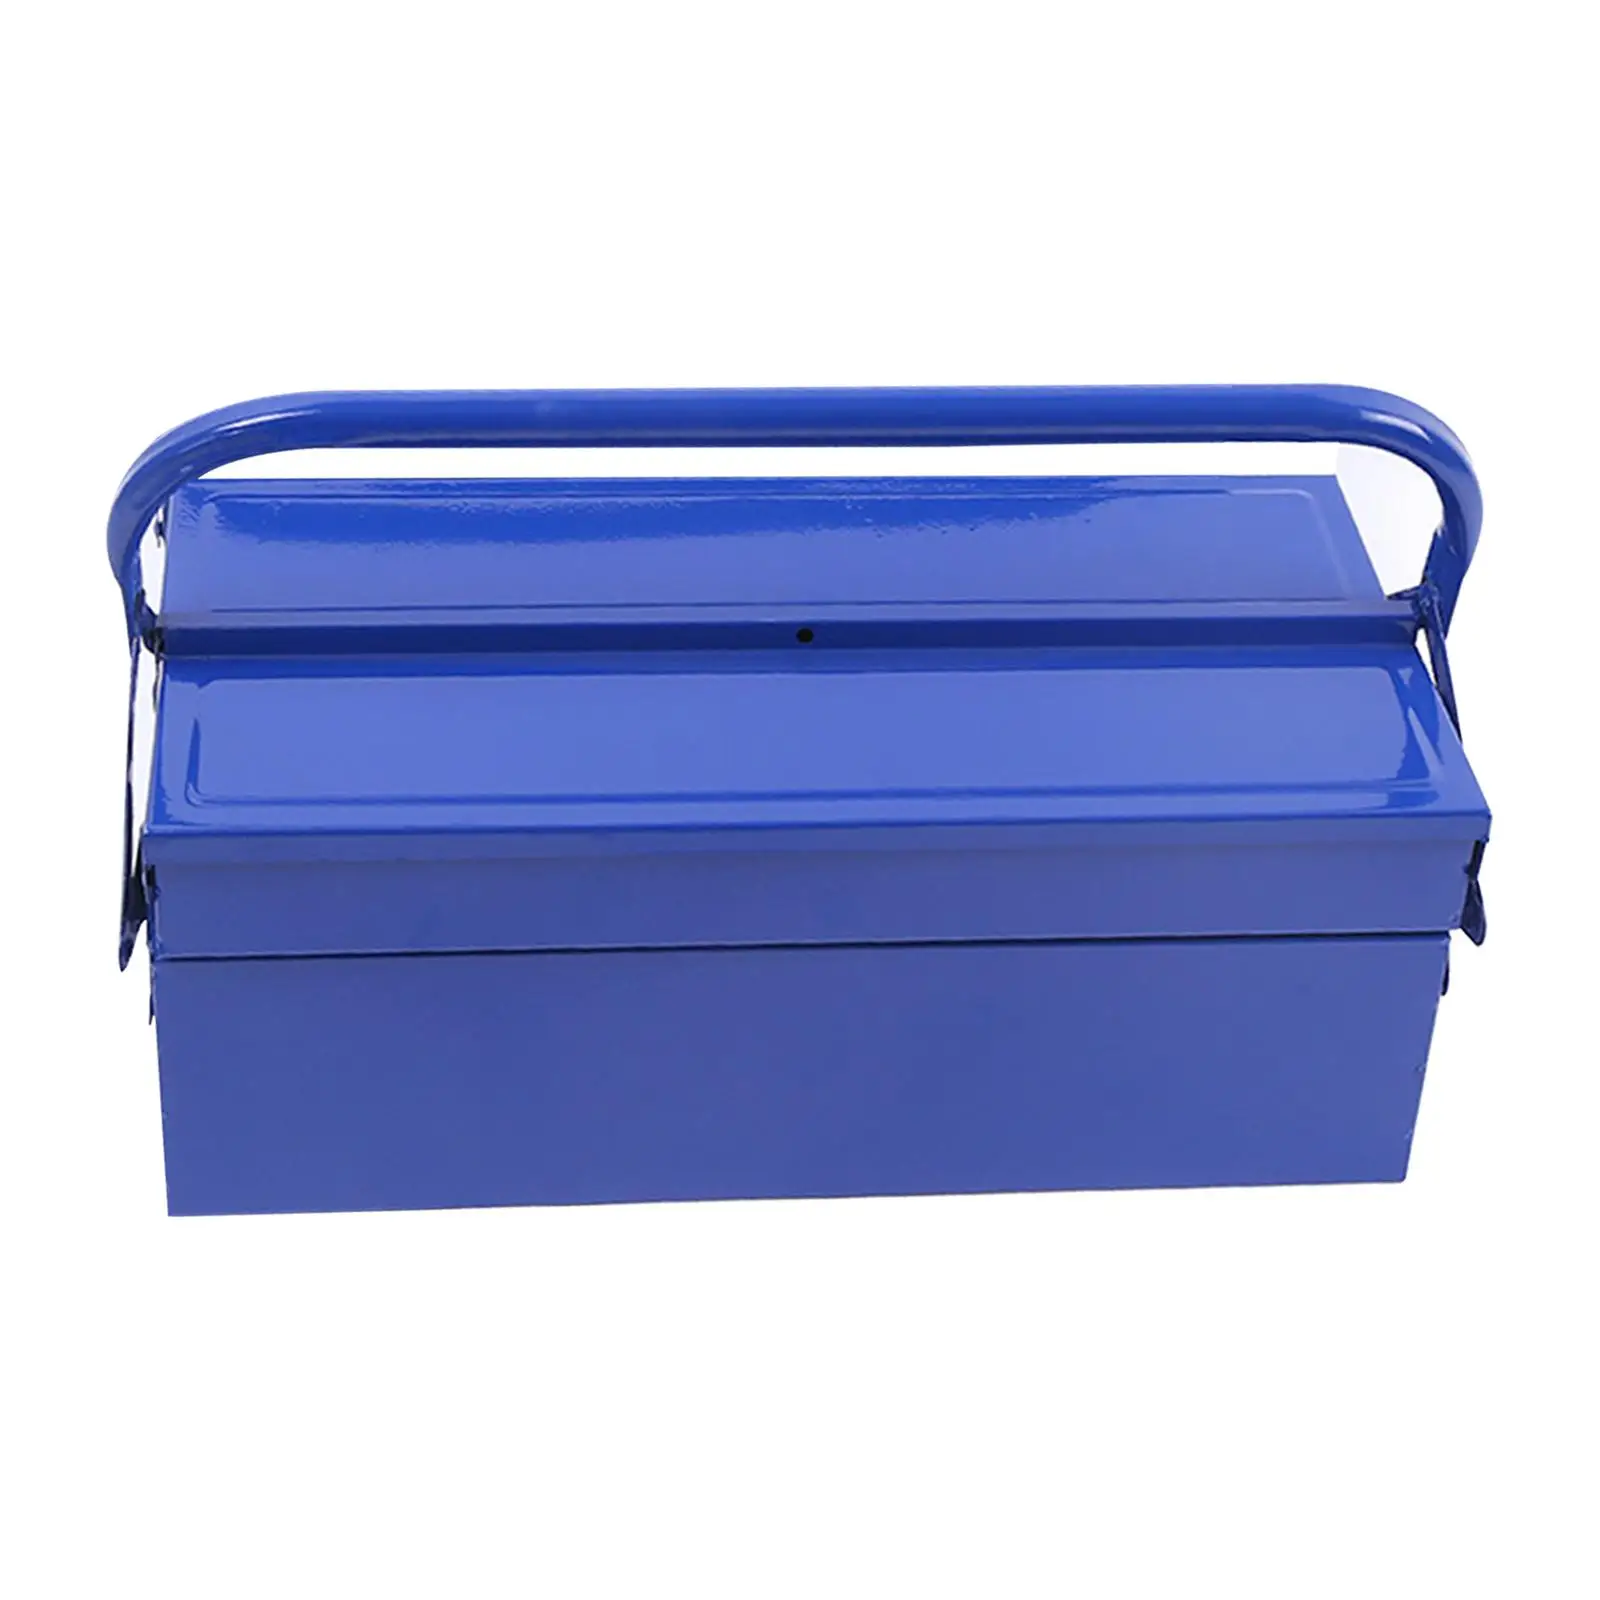 Tool Box with Handle Multifunction Repair Tool Storage Case Carrying Case Hardware Organizer for Household Car Warehouse Plumber